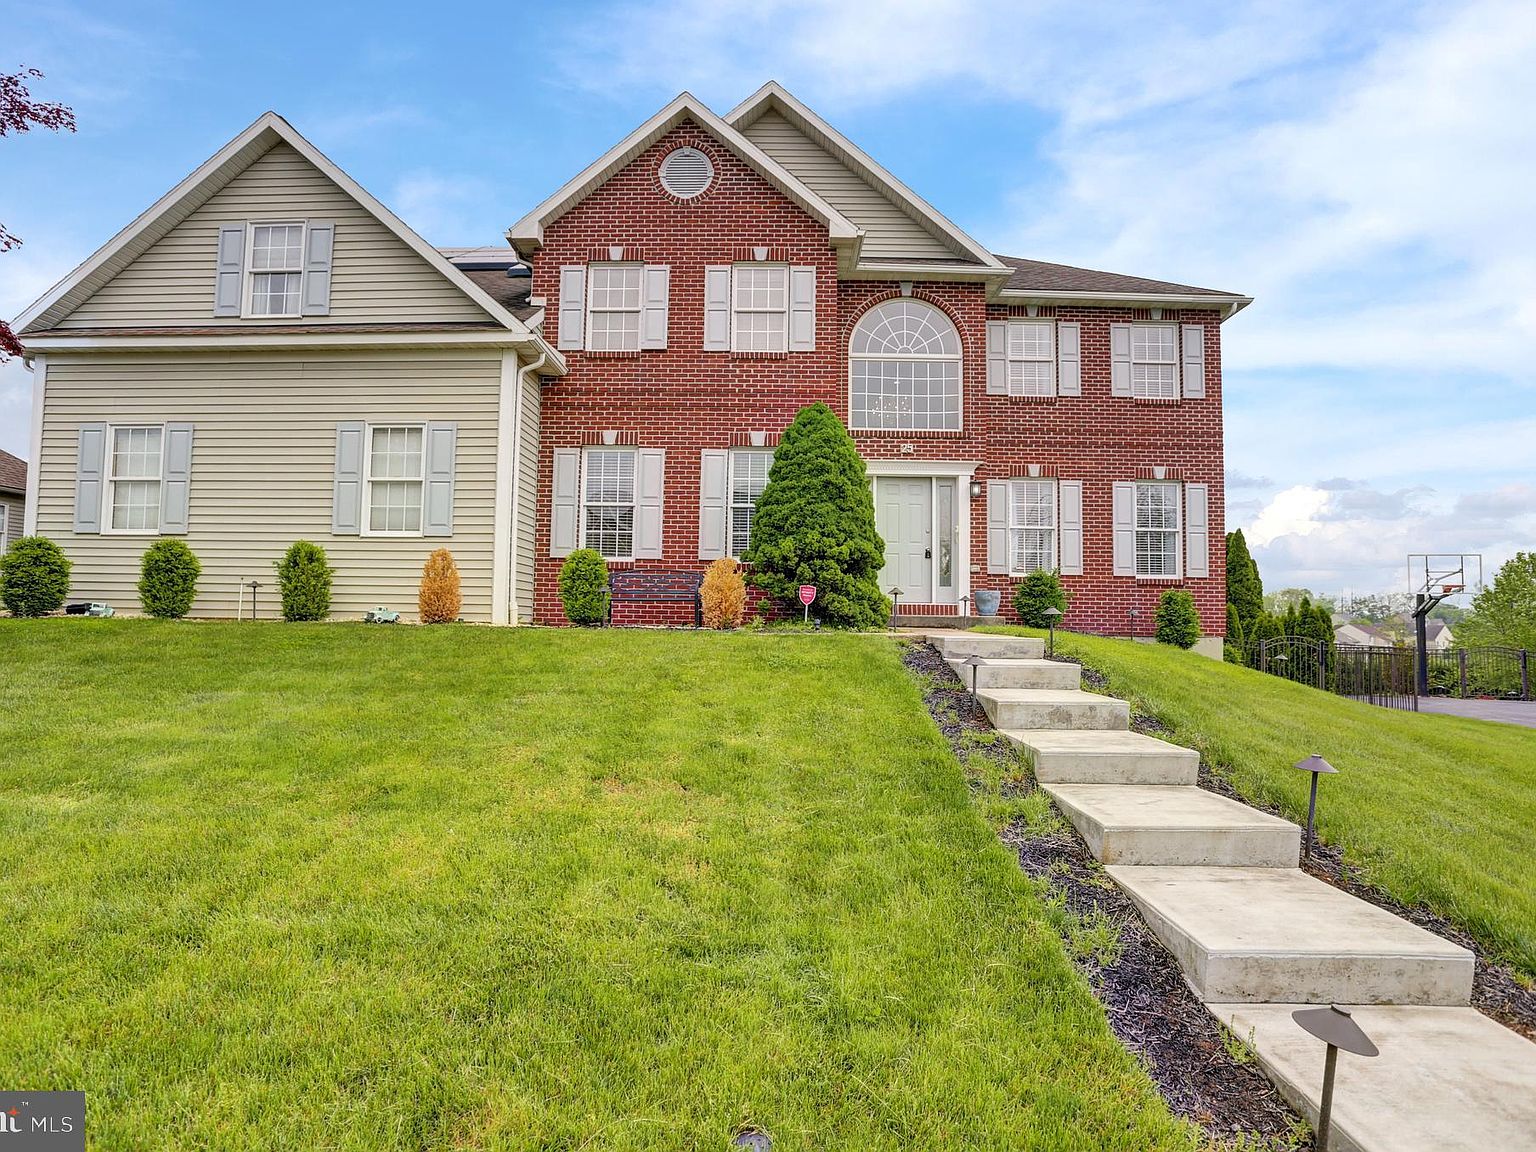 25 Fairwood Ave, Sinking Spring, PA 19608 | Zillow